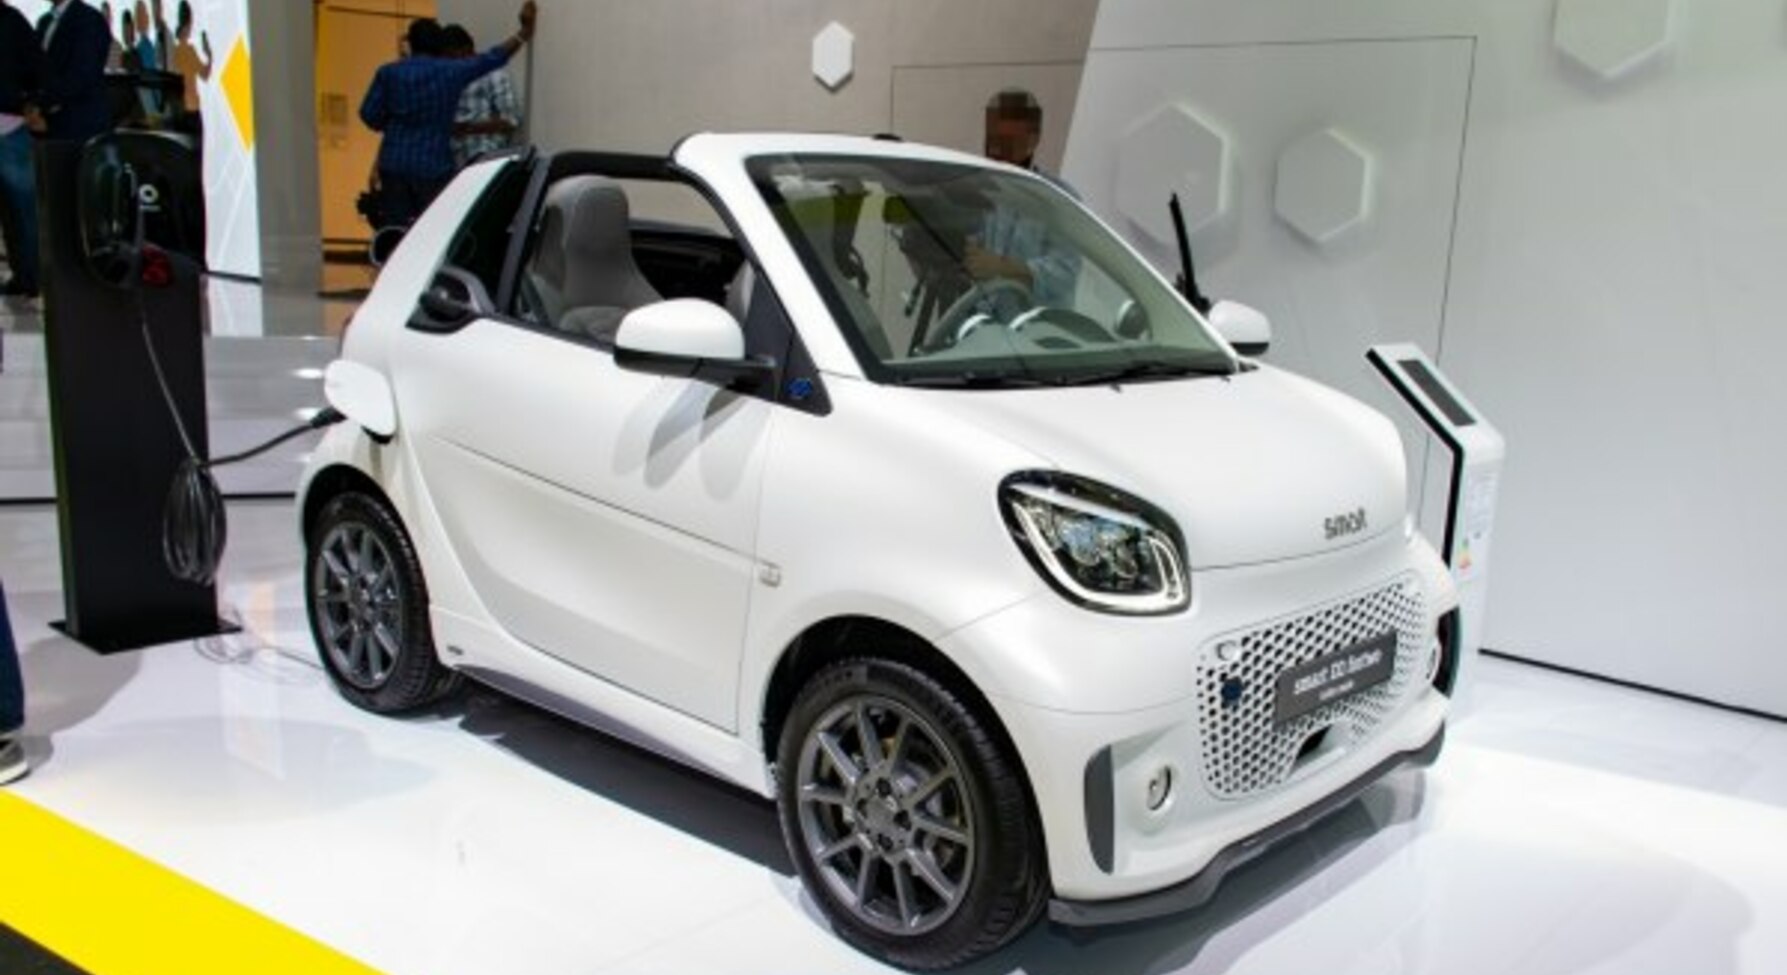 Smart EQ fortwo cabrio (A453, facelift, 2019) 17.2 kWh (82 Hp) 2020, 2021, 2022 